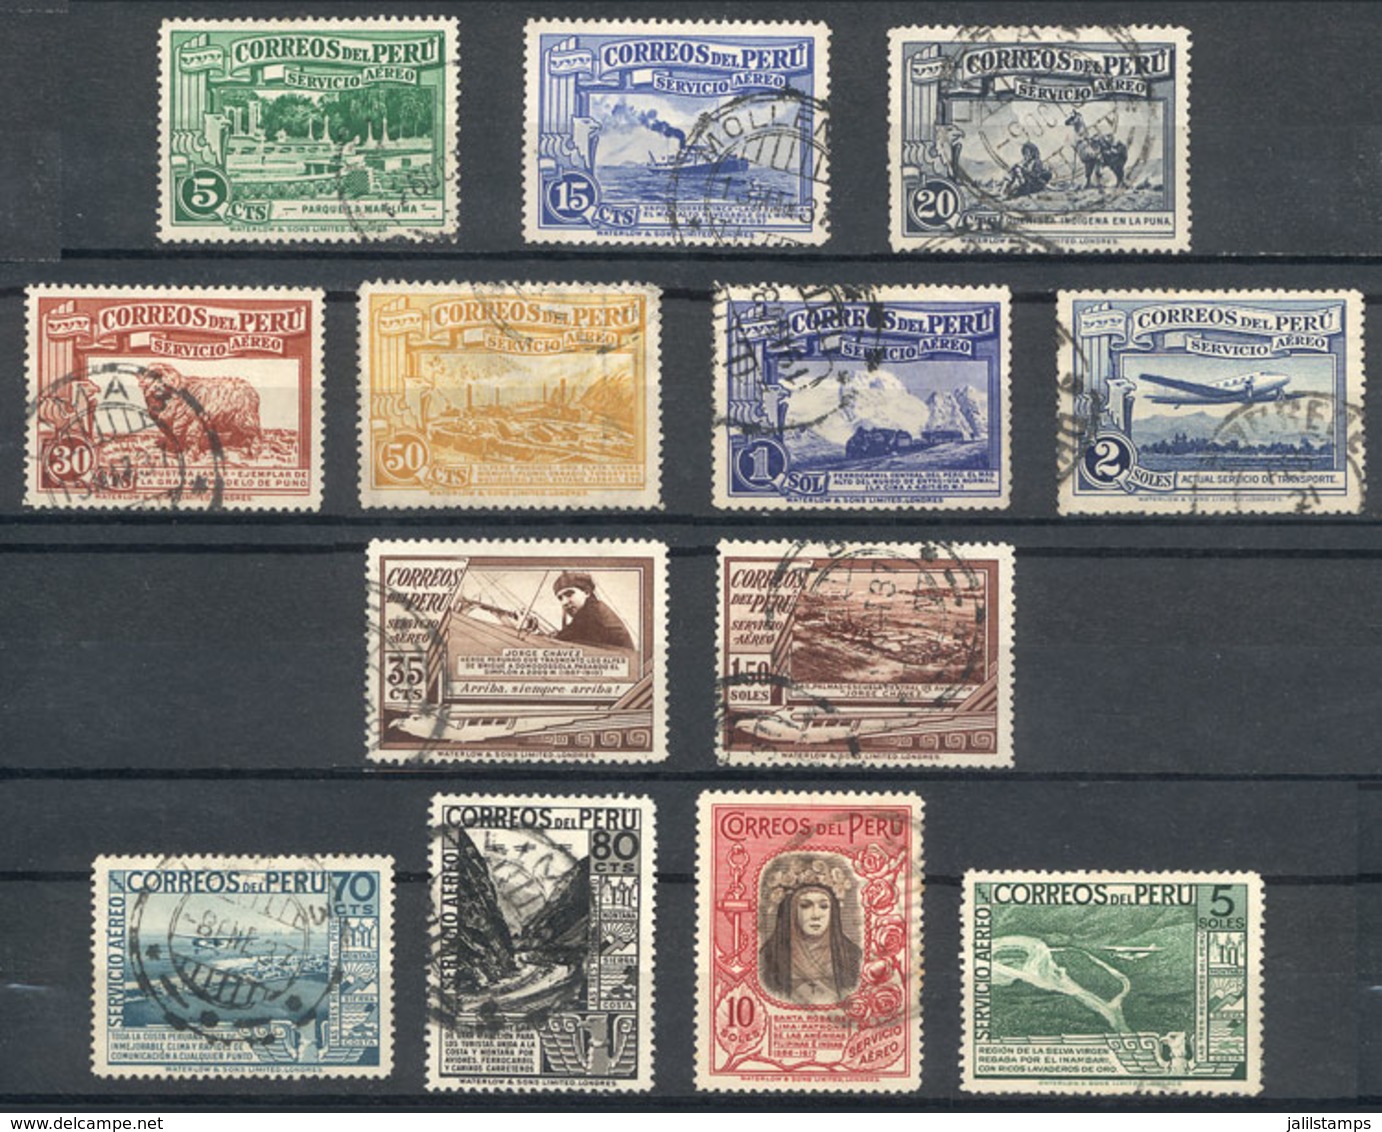 PERU: Sc.C16 + Other Values (Yvert 16/28), 1936 Complete Set Of 13 Used Values, Fine To Very Fine Quality, Yvert Catalog - Pérou